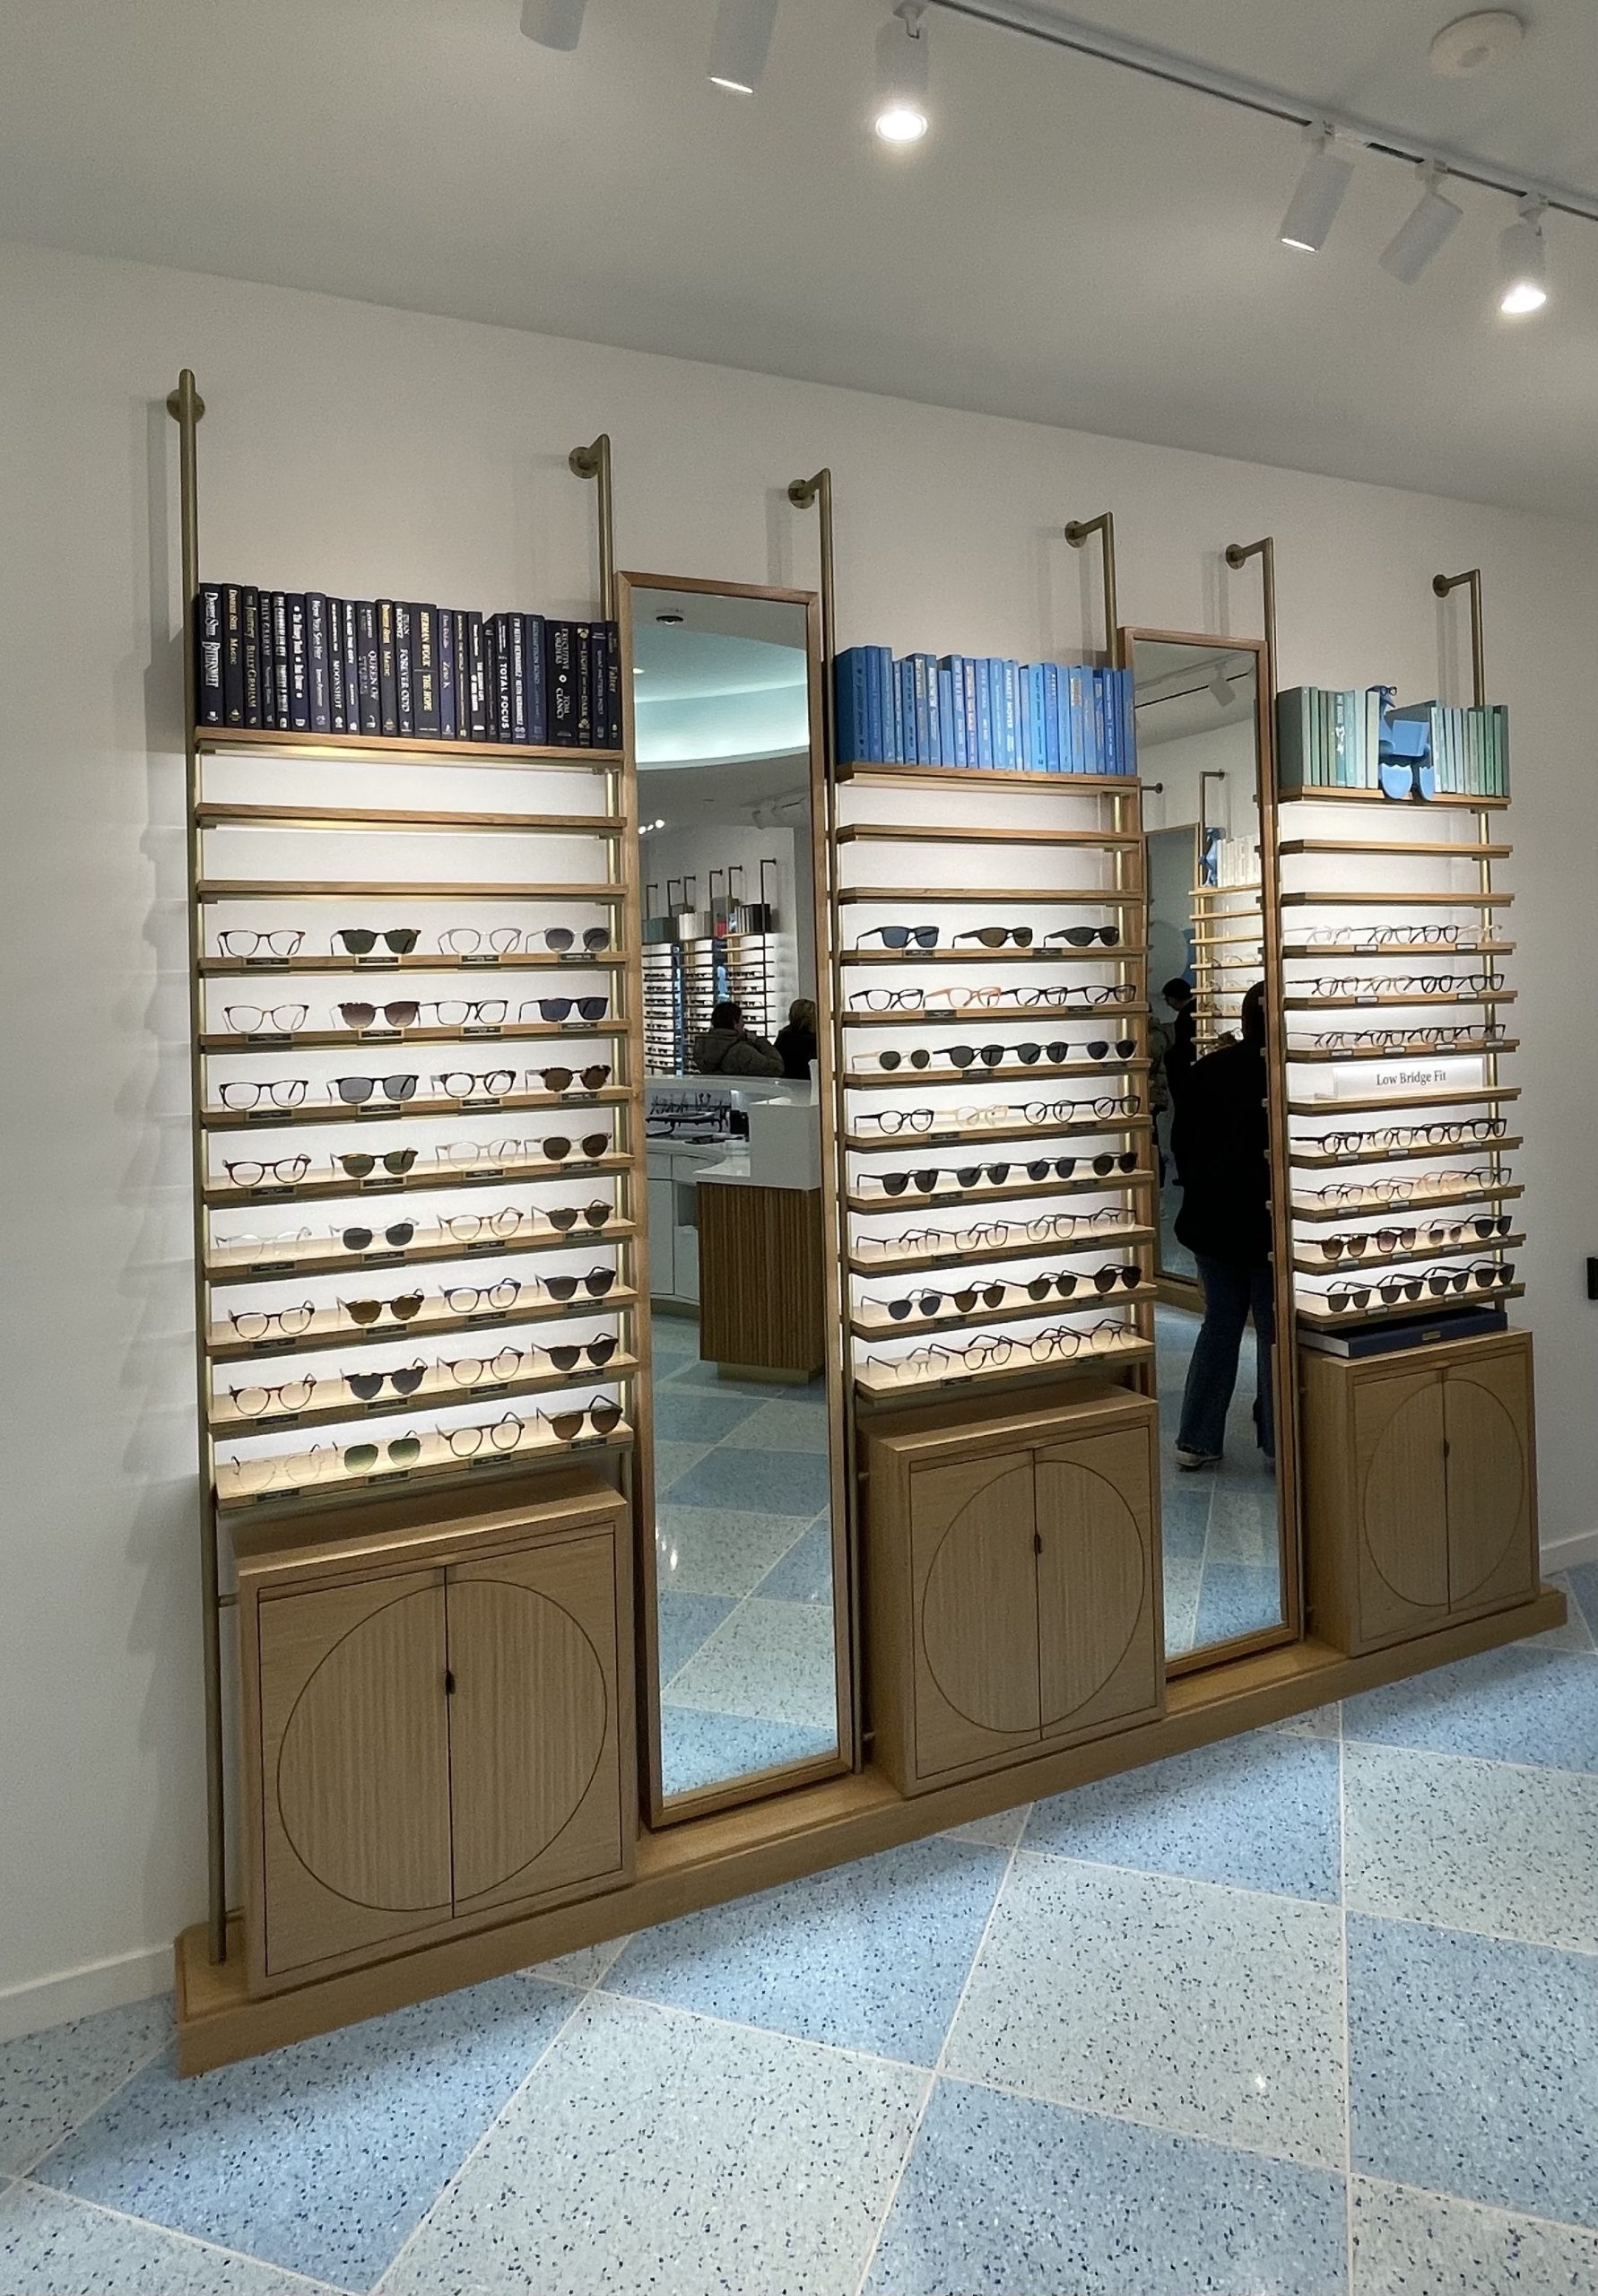 E-commerce giant Warby Parker opens new store at Fashion Valley - The San  Diego Union-Tribune